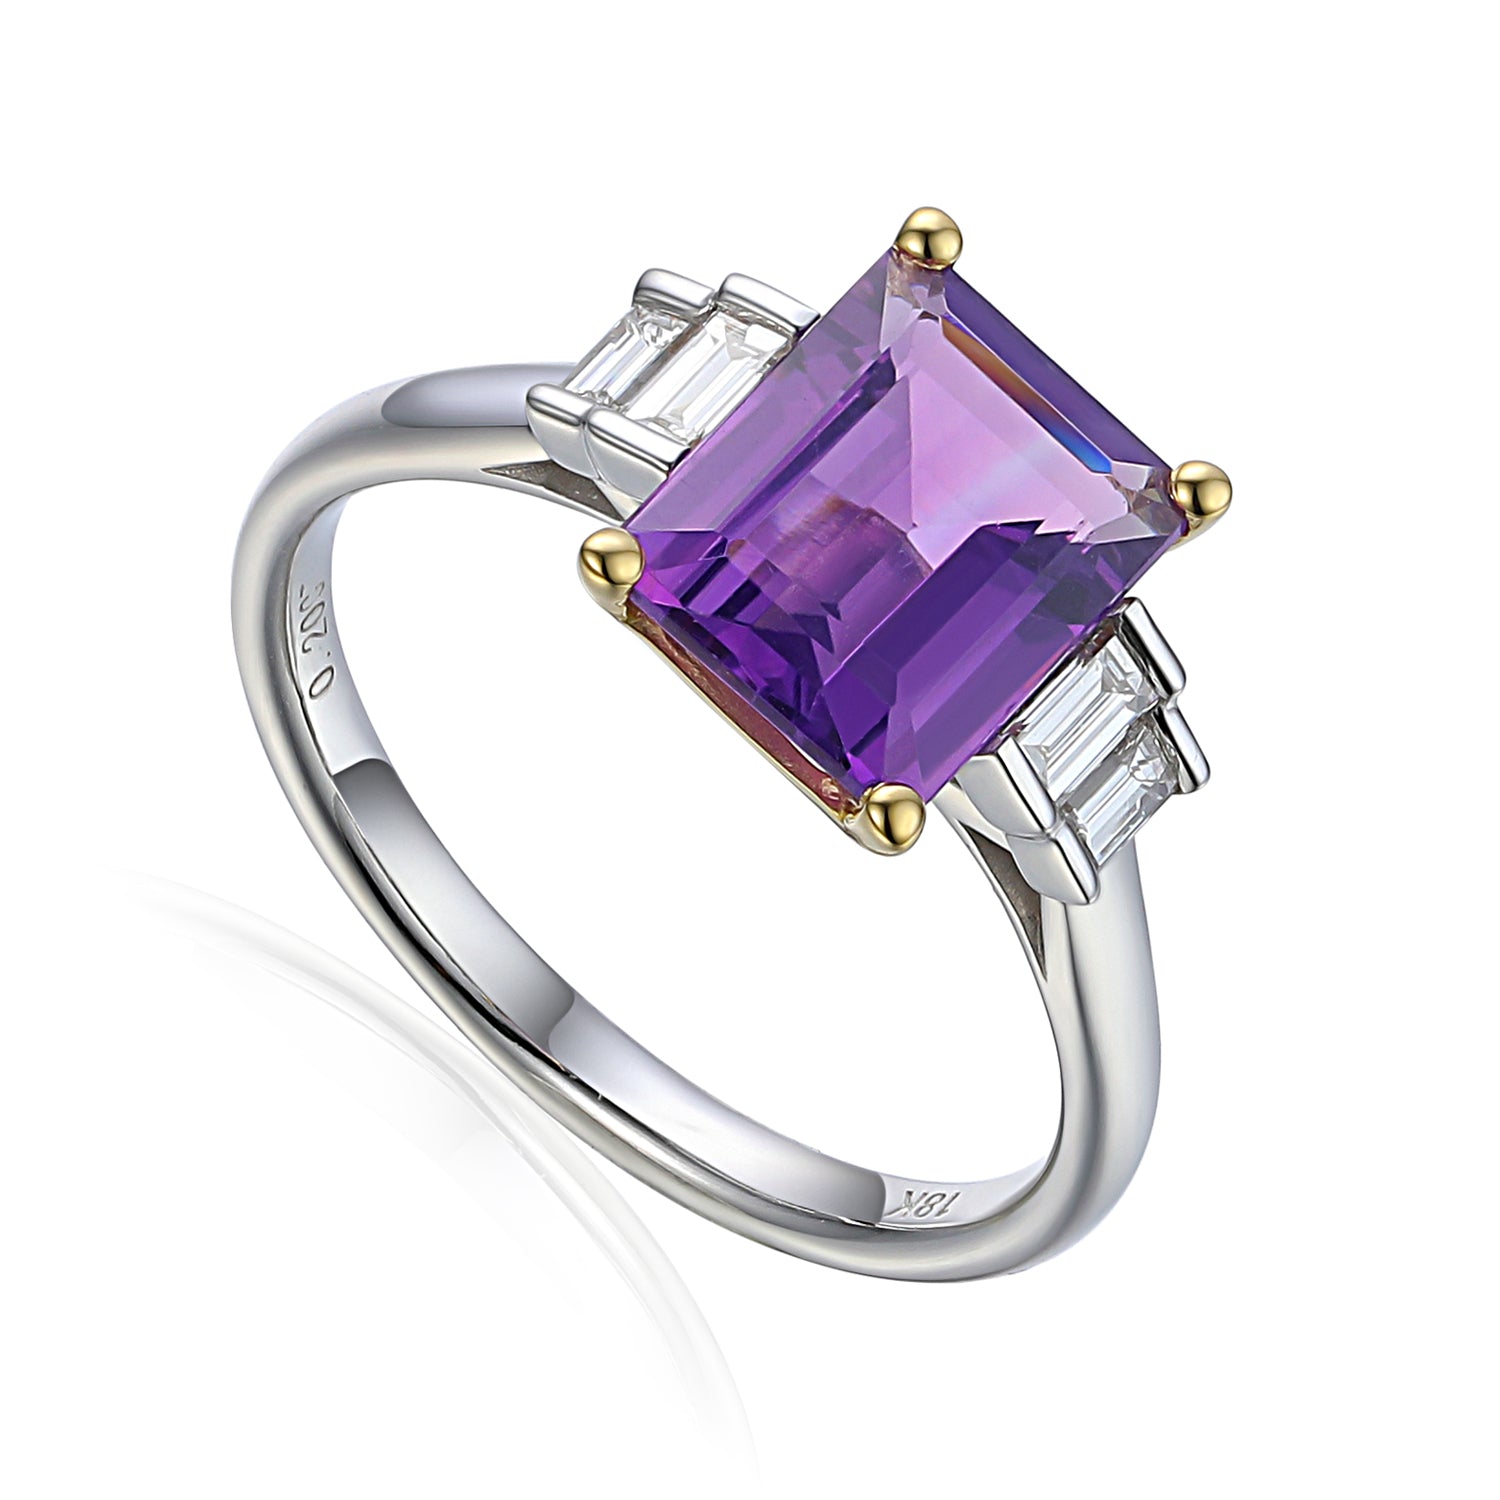 Octagon Gemstone Ring with Double Baguette Shoulders